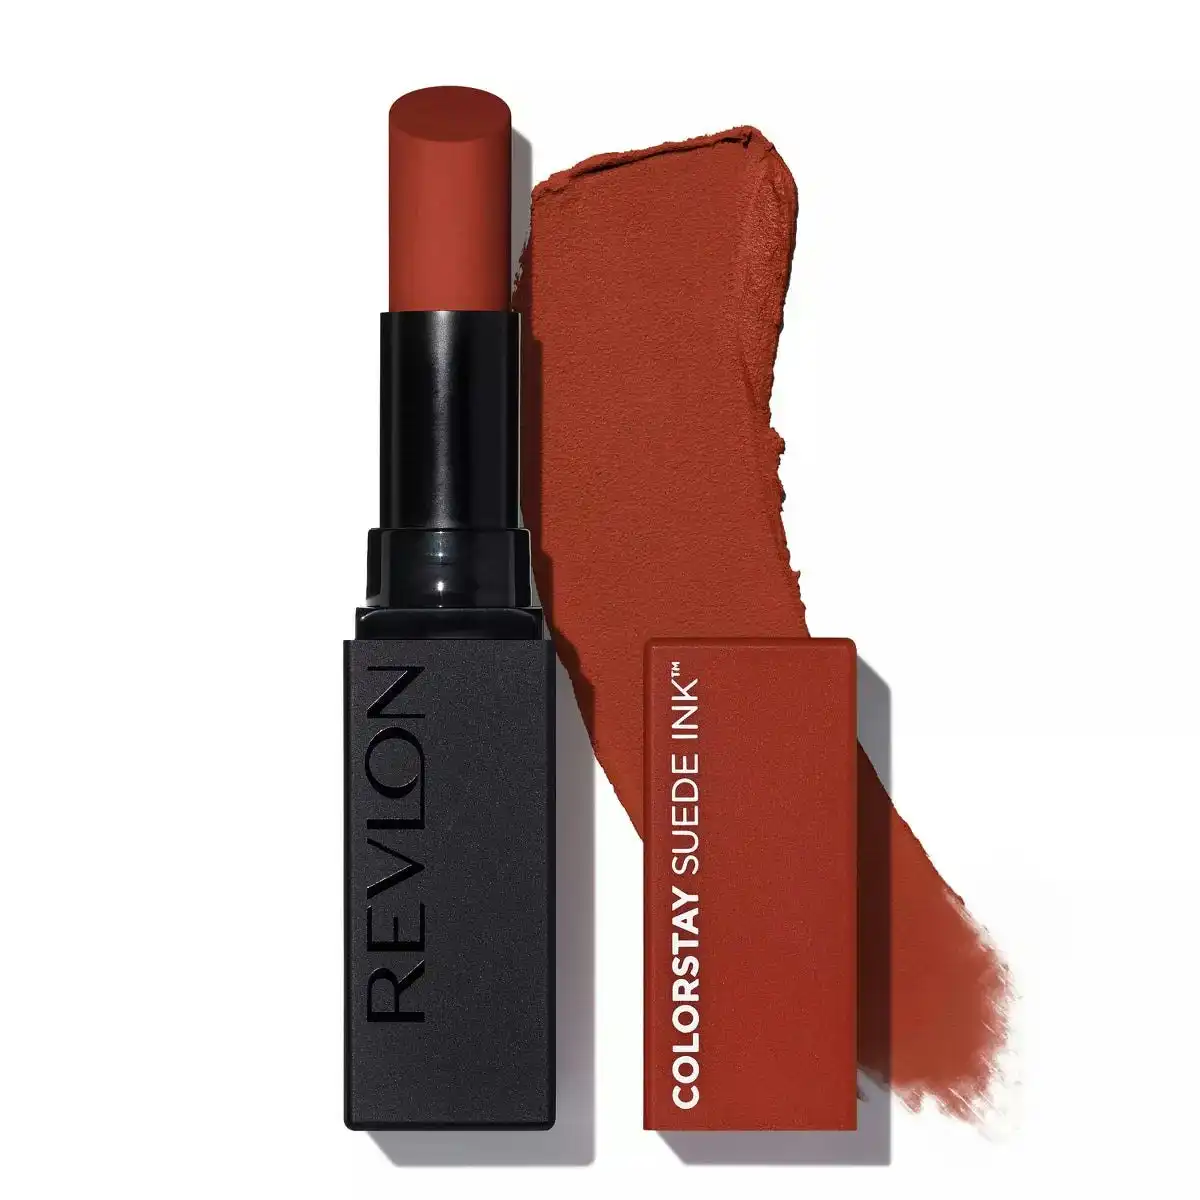 Relon Revlon Colorstay Suede Ink Lightweight With Vitamin E Matte Lipstick In The Money